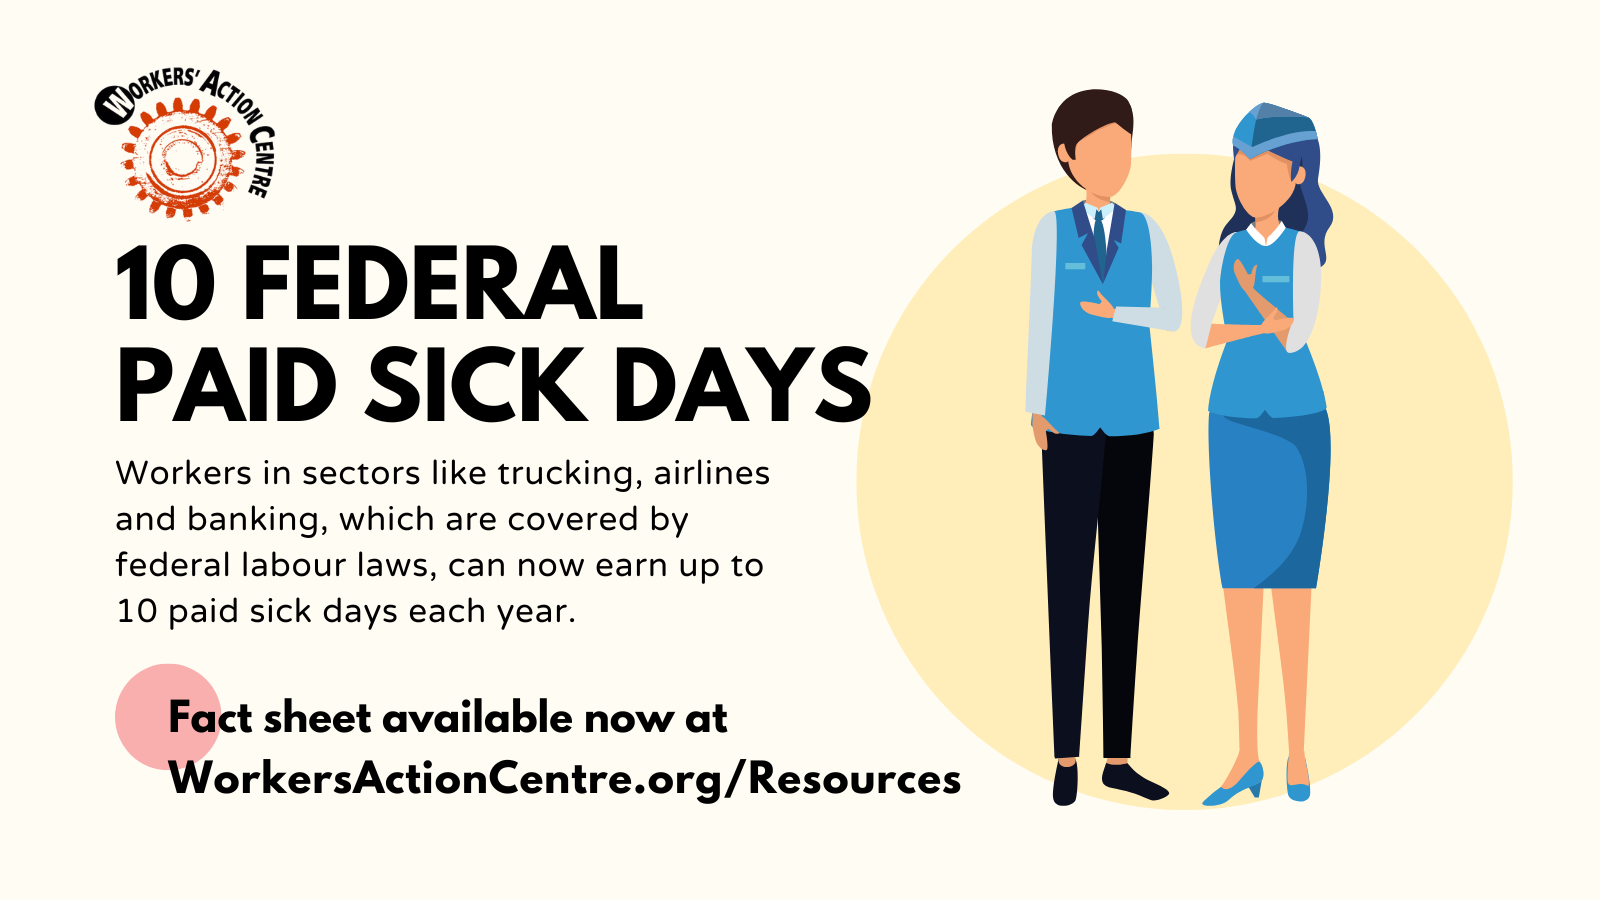 10 Federal Paid Sick Days fact sheet available